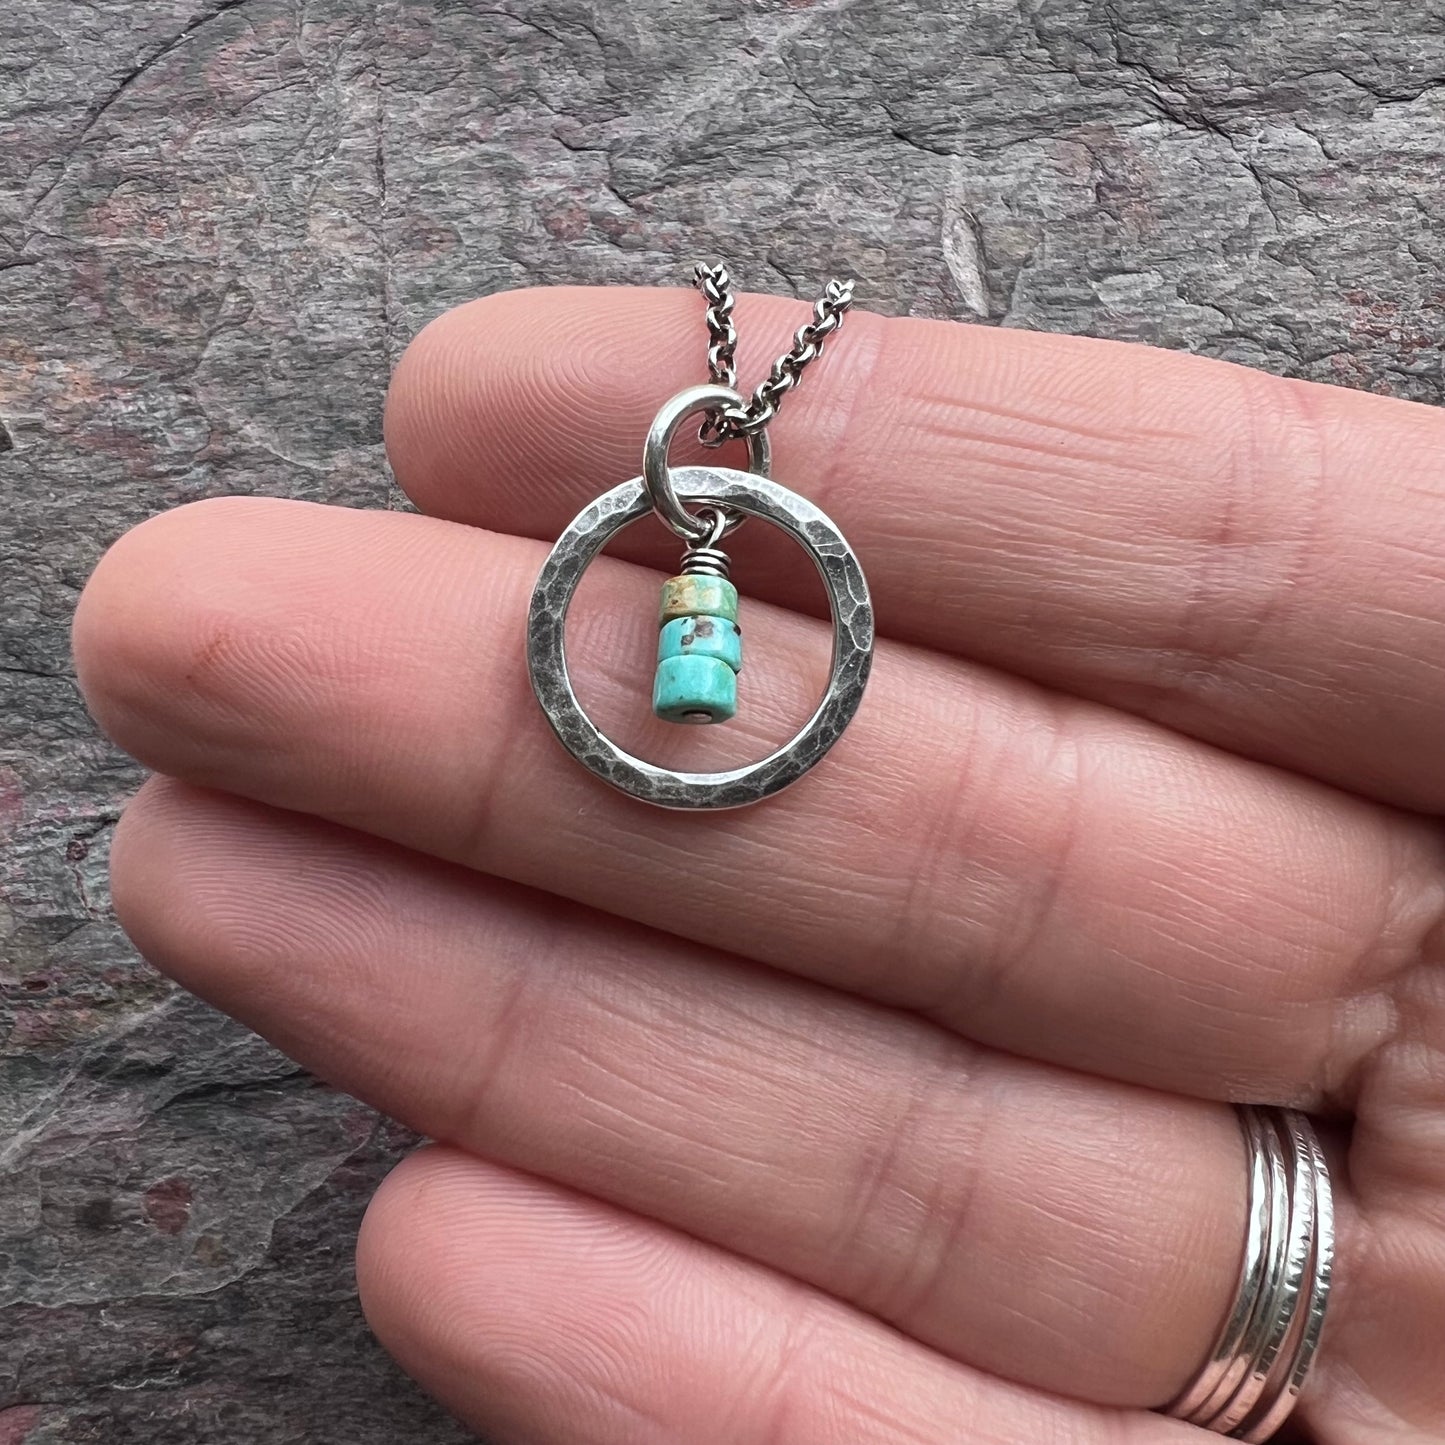 Turquoise Sterling Silver Necklace - Genuine Turquoise in Hammered Circle Pendant on Sterling Silver